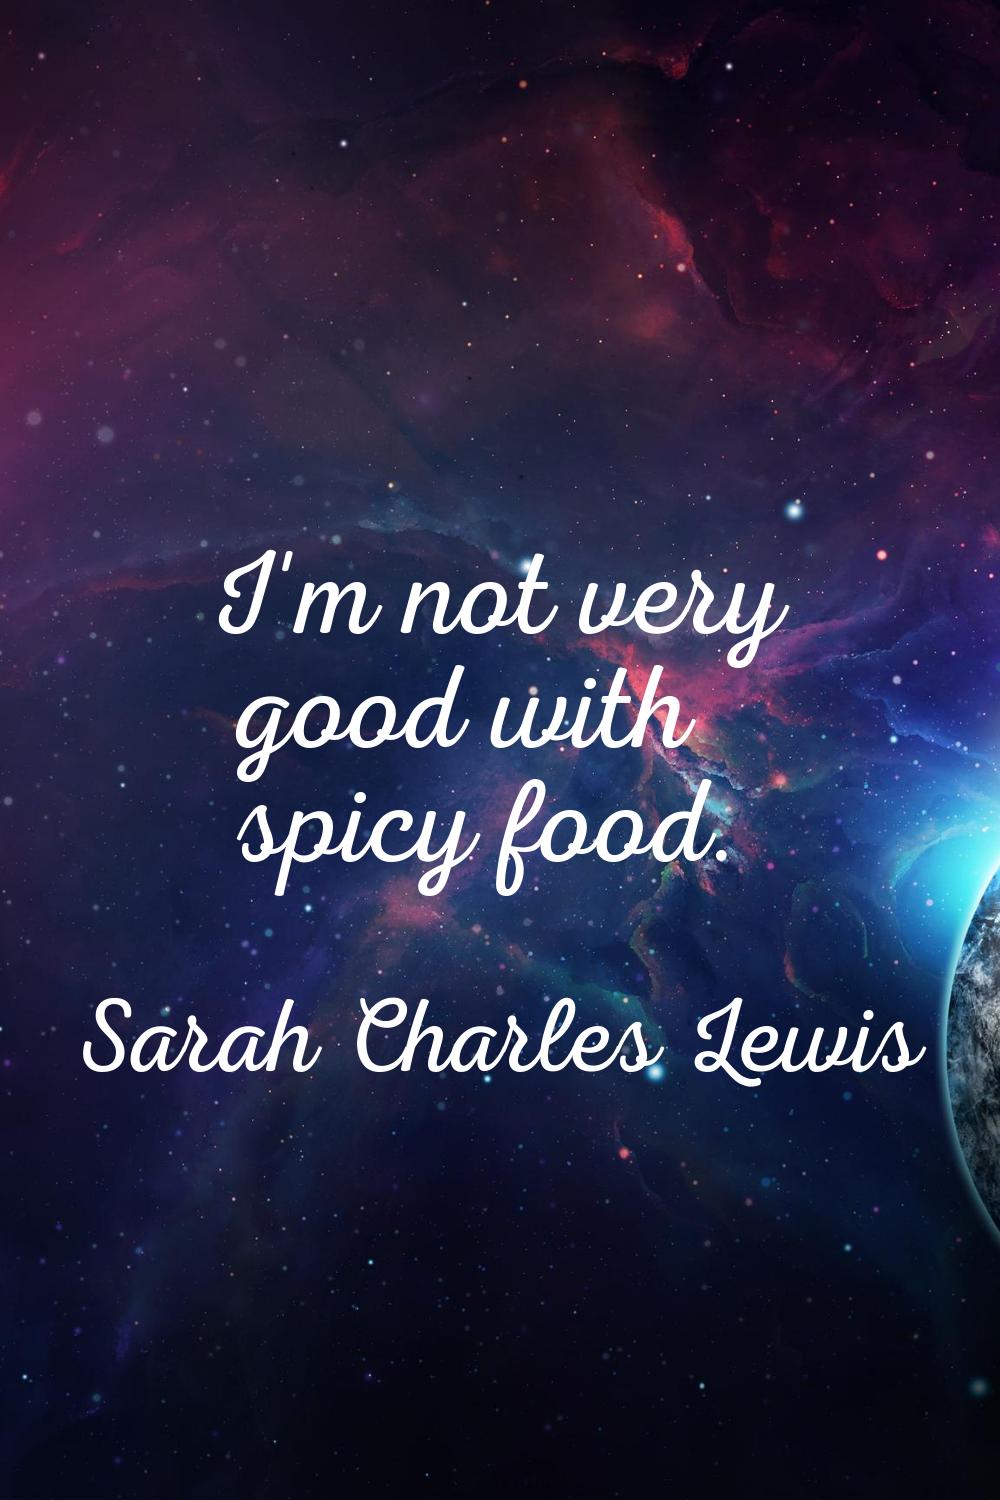 I'm not very good with spicy food.